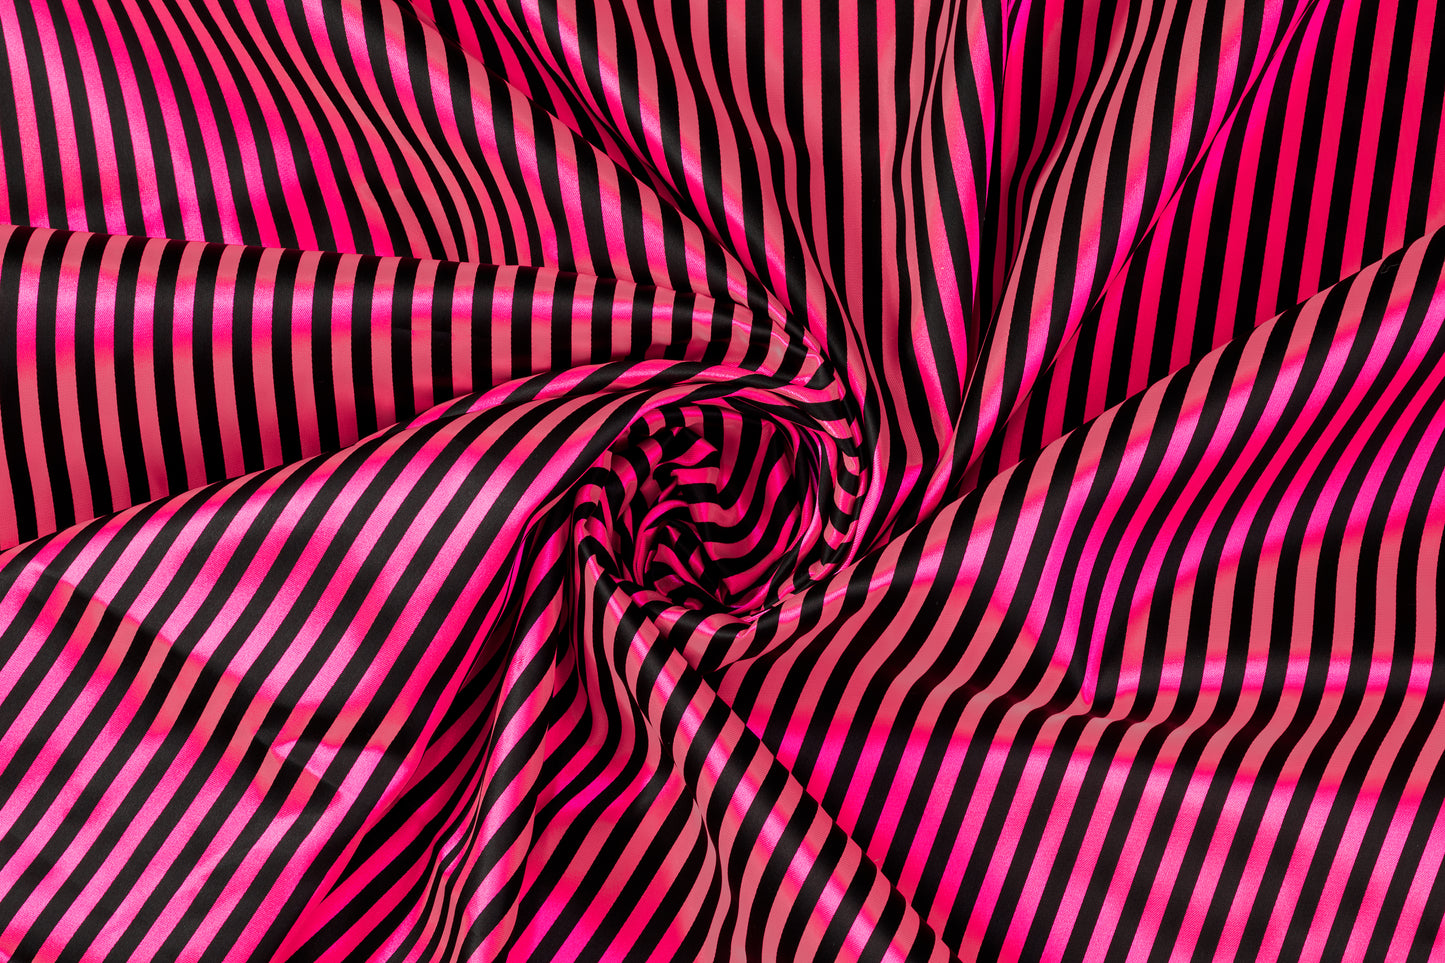 Striped Poly Acetate Satin - Pink and Black